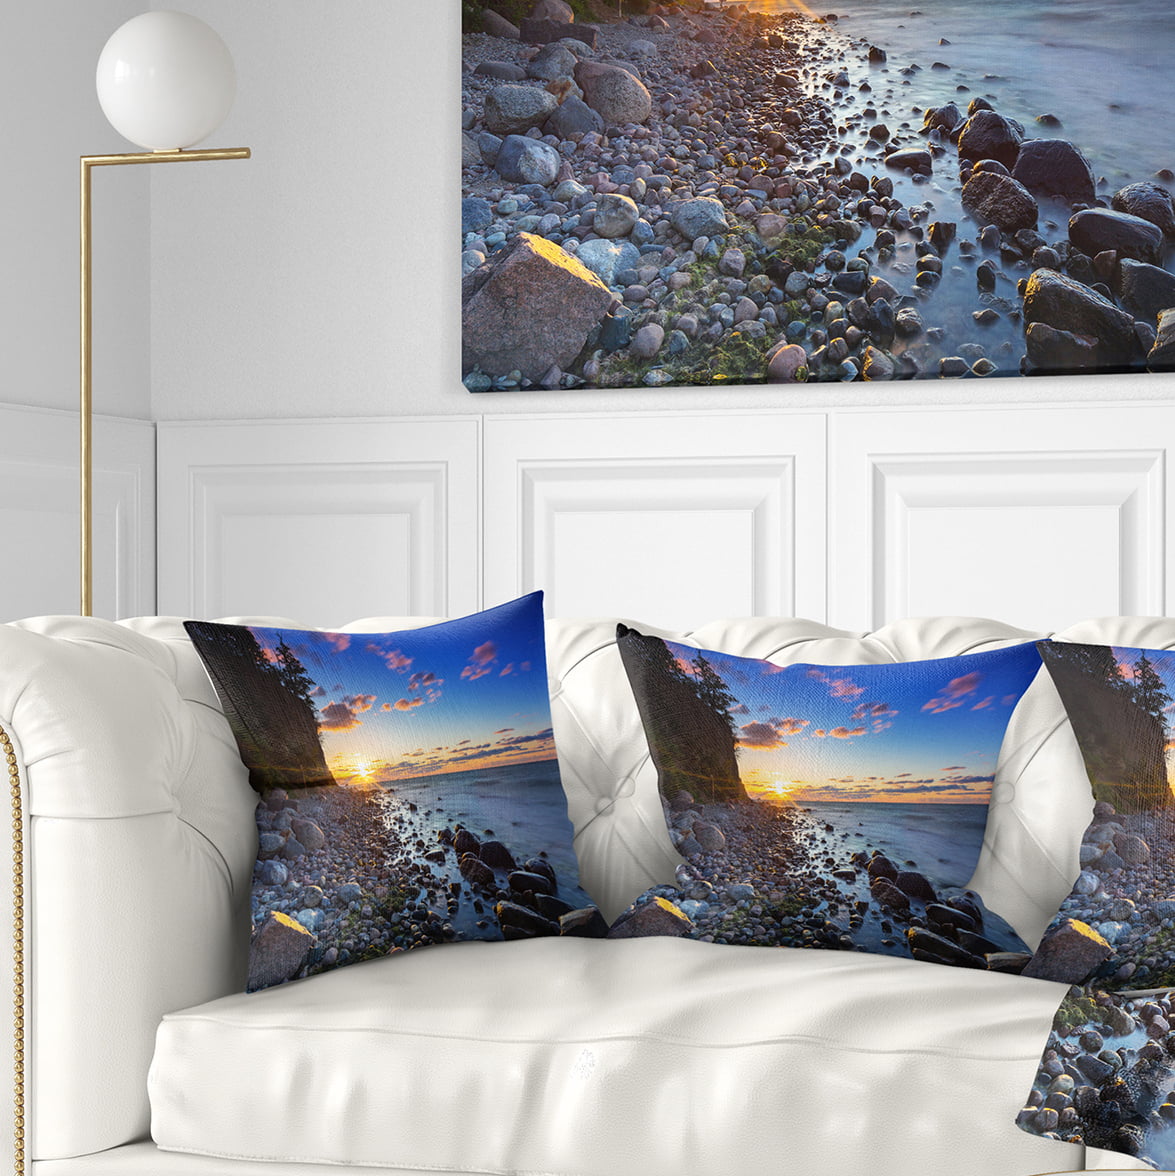 Insert Printed On Both Side Designart CU9925-26-26 Baltic Sea and Orlowo Cliff at Sunrise Seascape Cushion Cover for Living Room x 26 in Sofa Throw Pillow 26 in in 